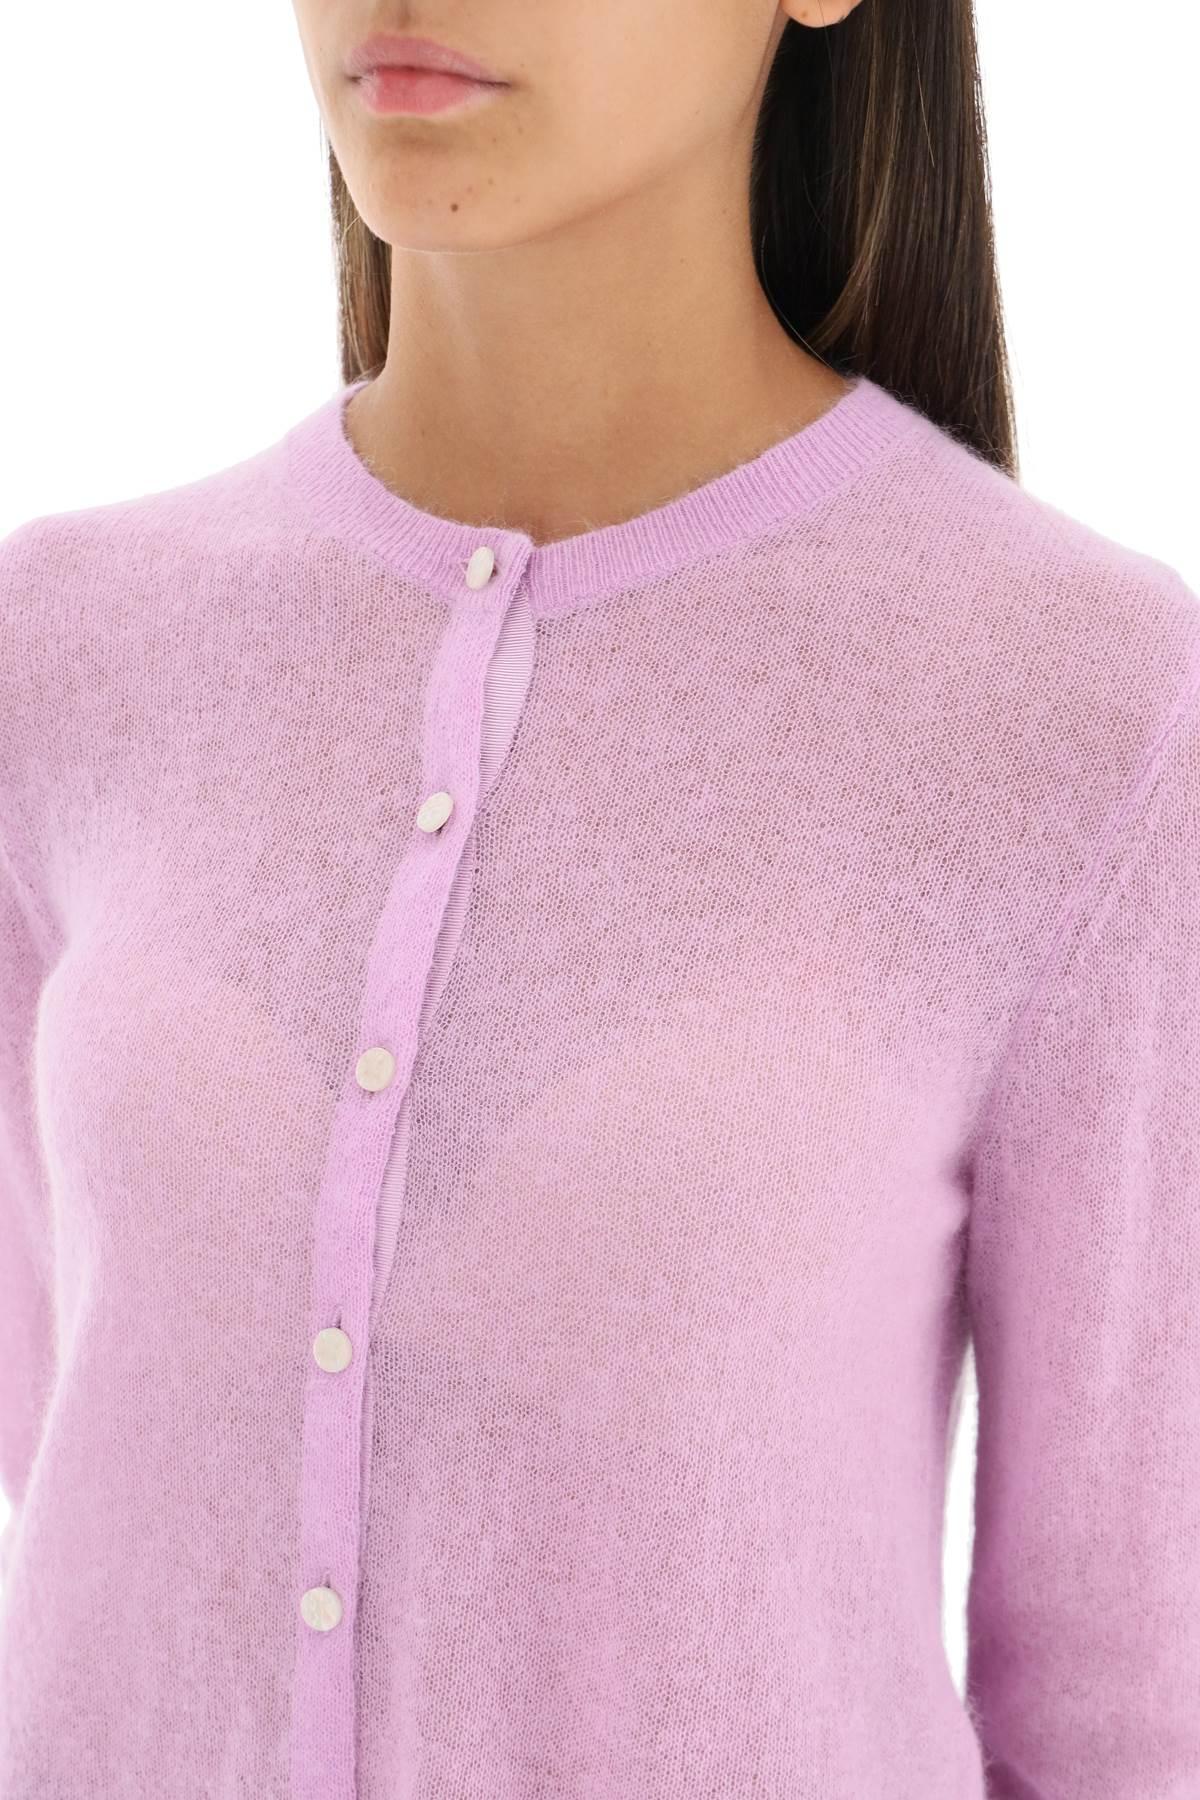 Womens Jumpers and knitwear Tory Burch Jumpers and knitwear Pink Tory Burch Wool Mohair Crewneck Cardigan in Light Violet 